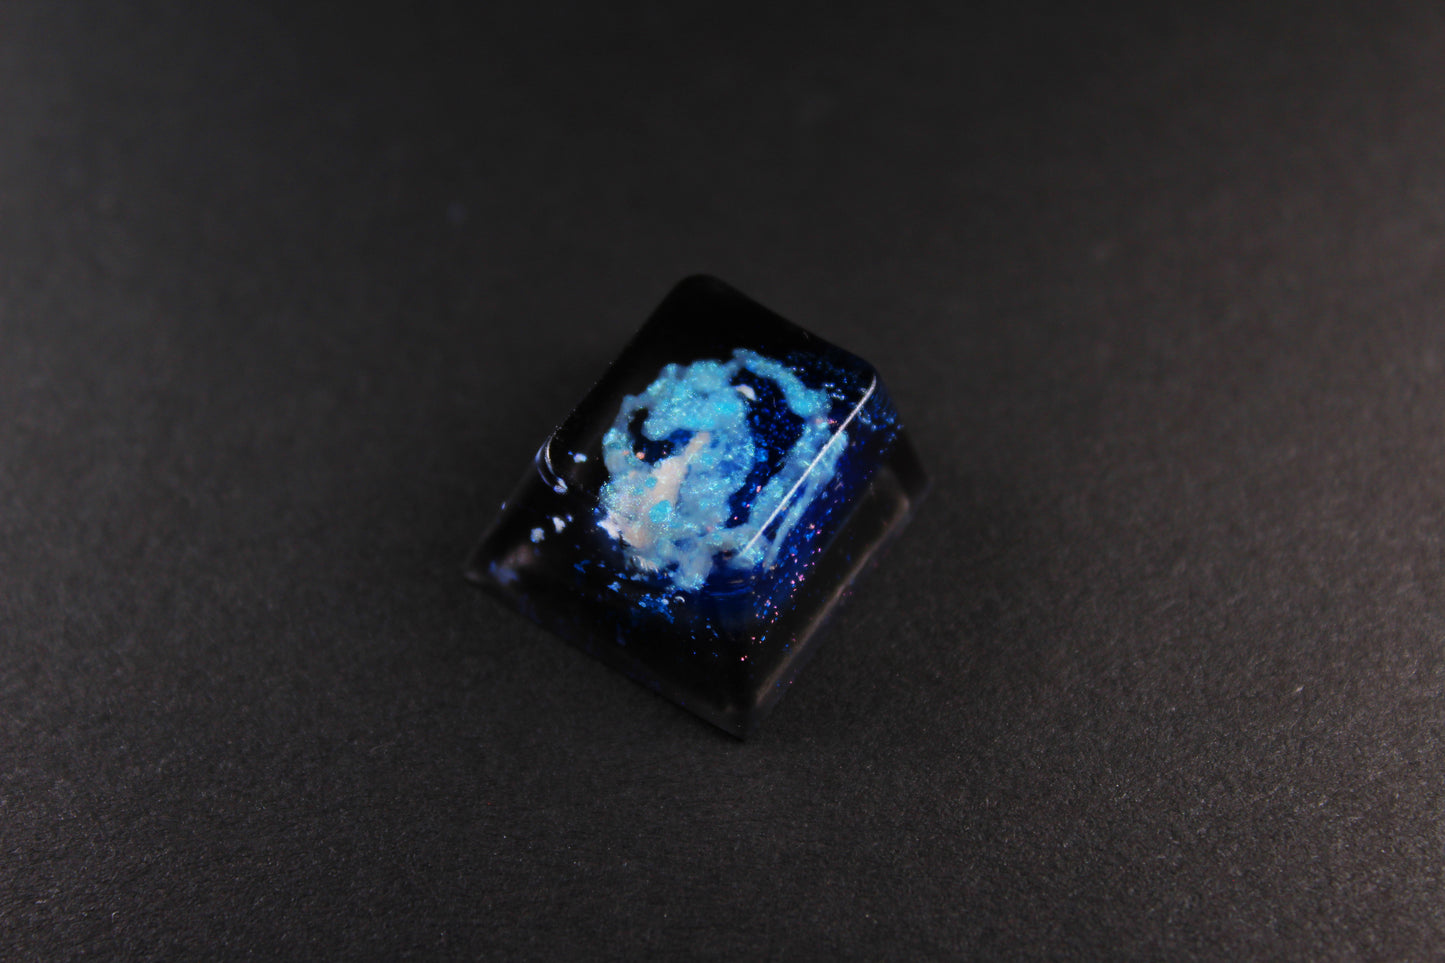 Cherry ESC - Star Gate - PrimeCaps Keycap - Blank and Sculpted Artisan Keycaps for cherry MX mechanical keyboards 